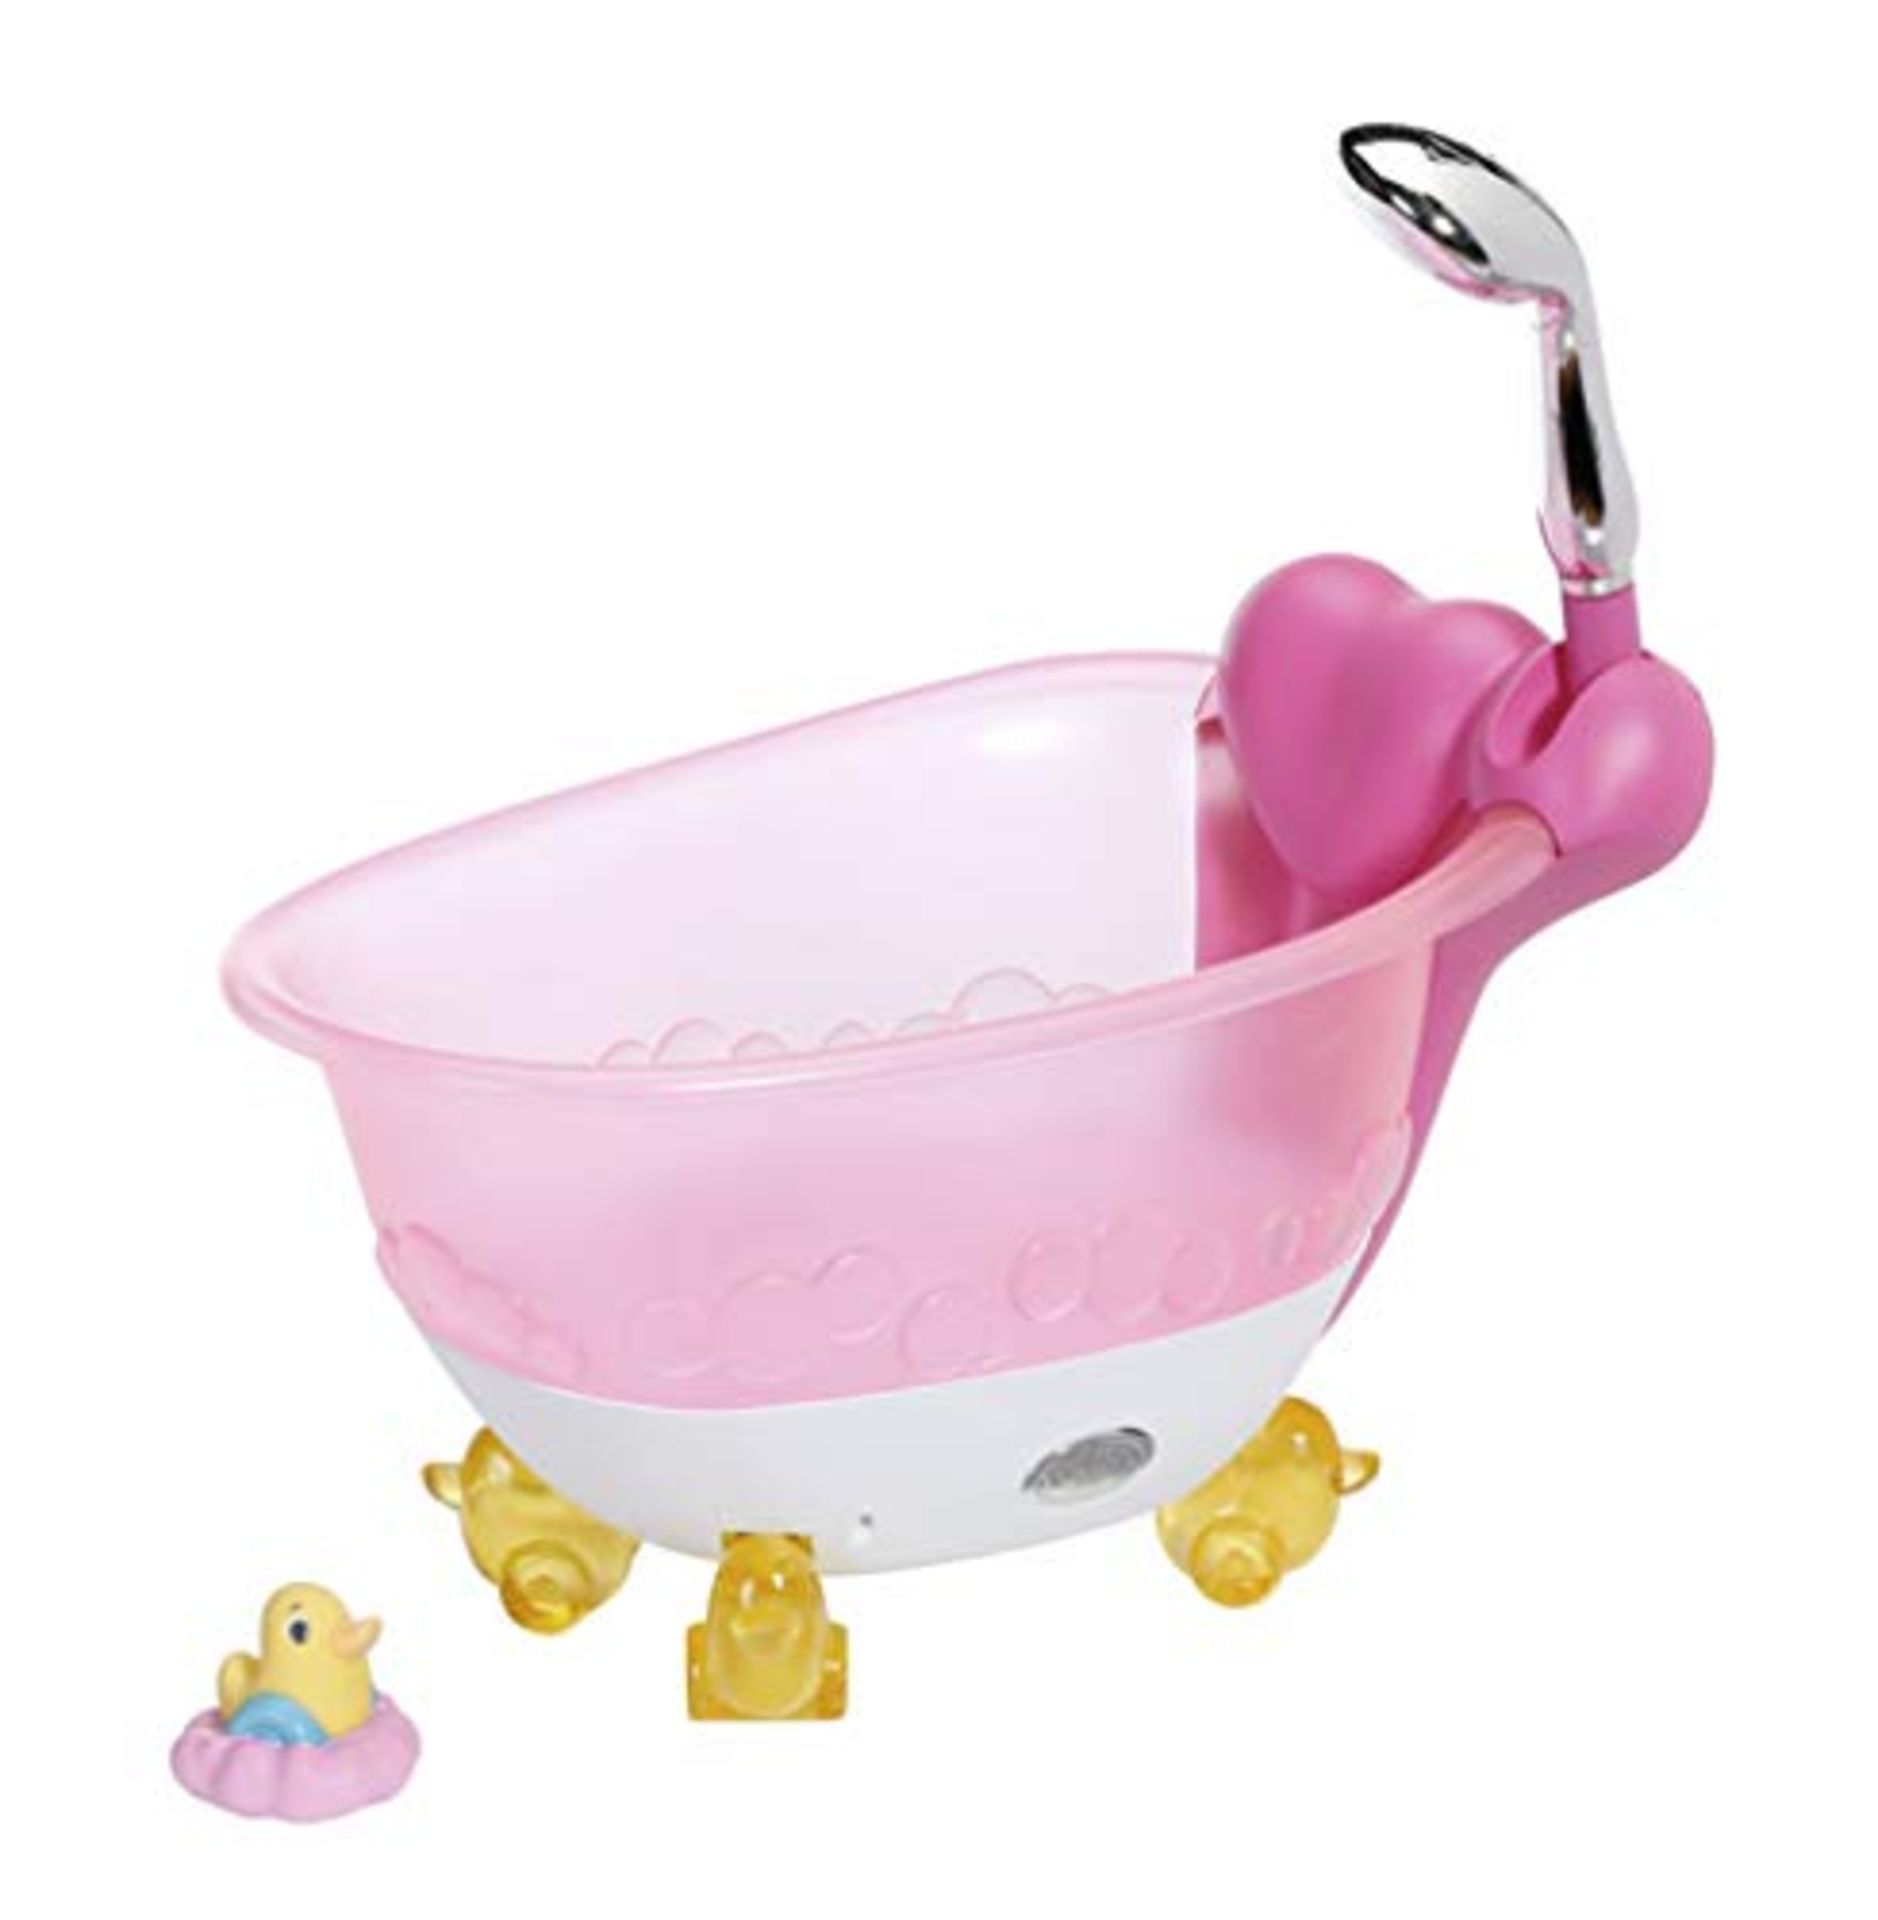 BABY born Bath - Bathtub with Real Light & Sound Effects - For Small Hands - Includes